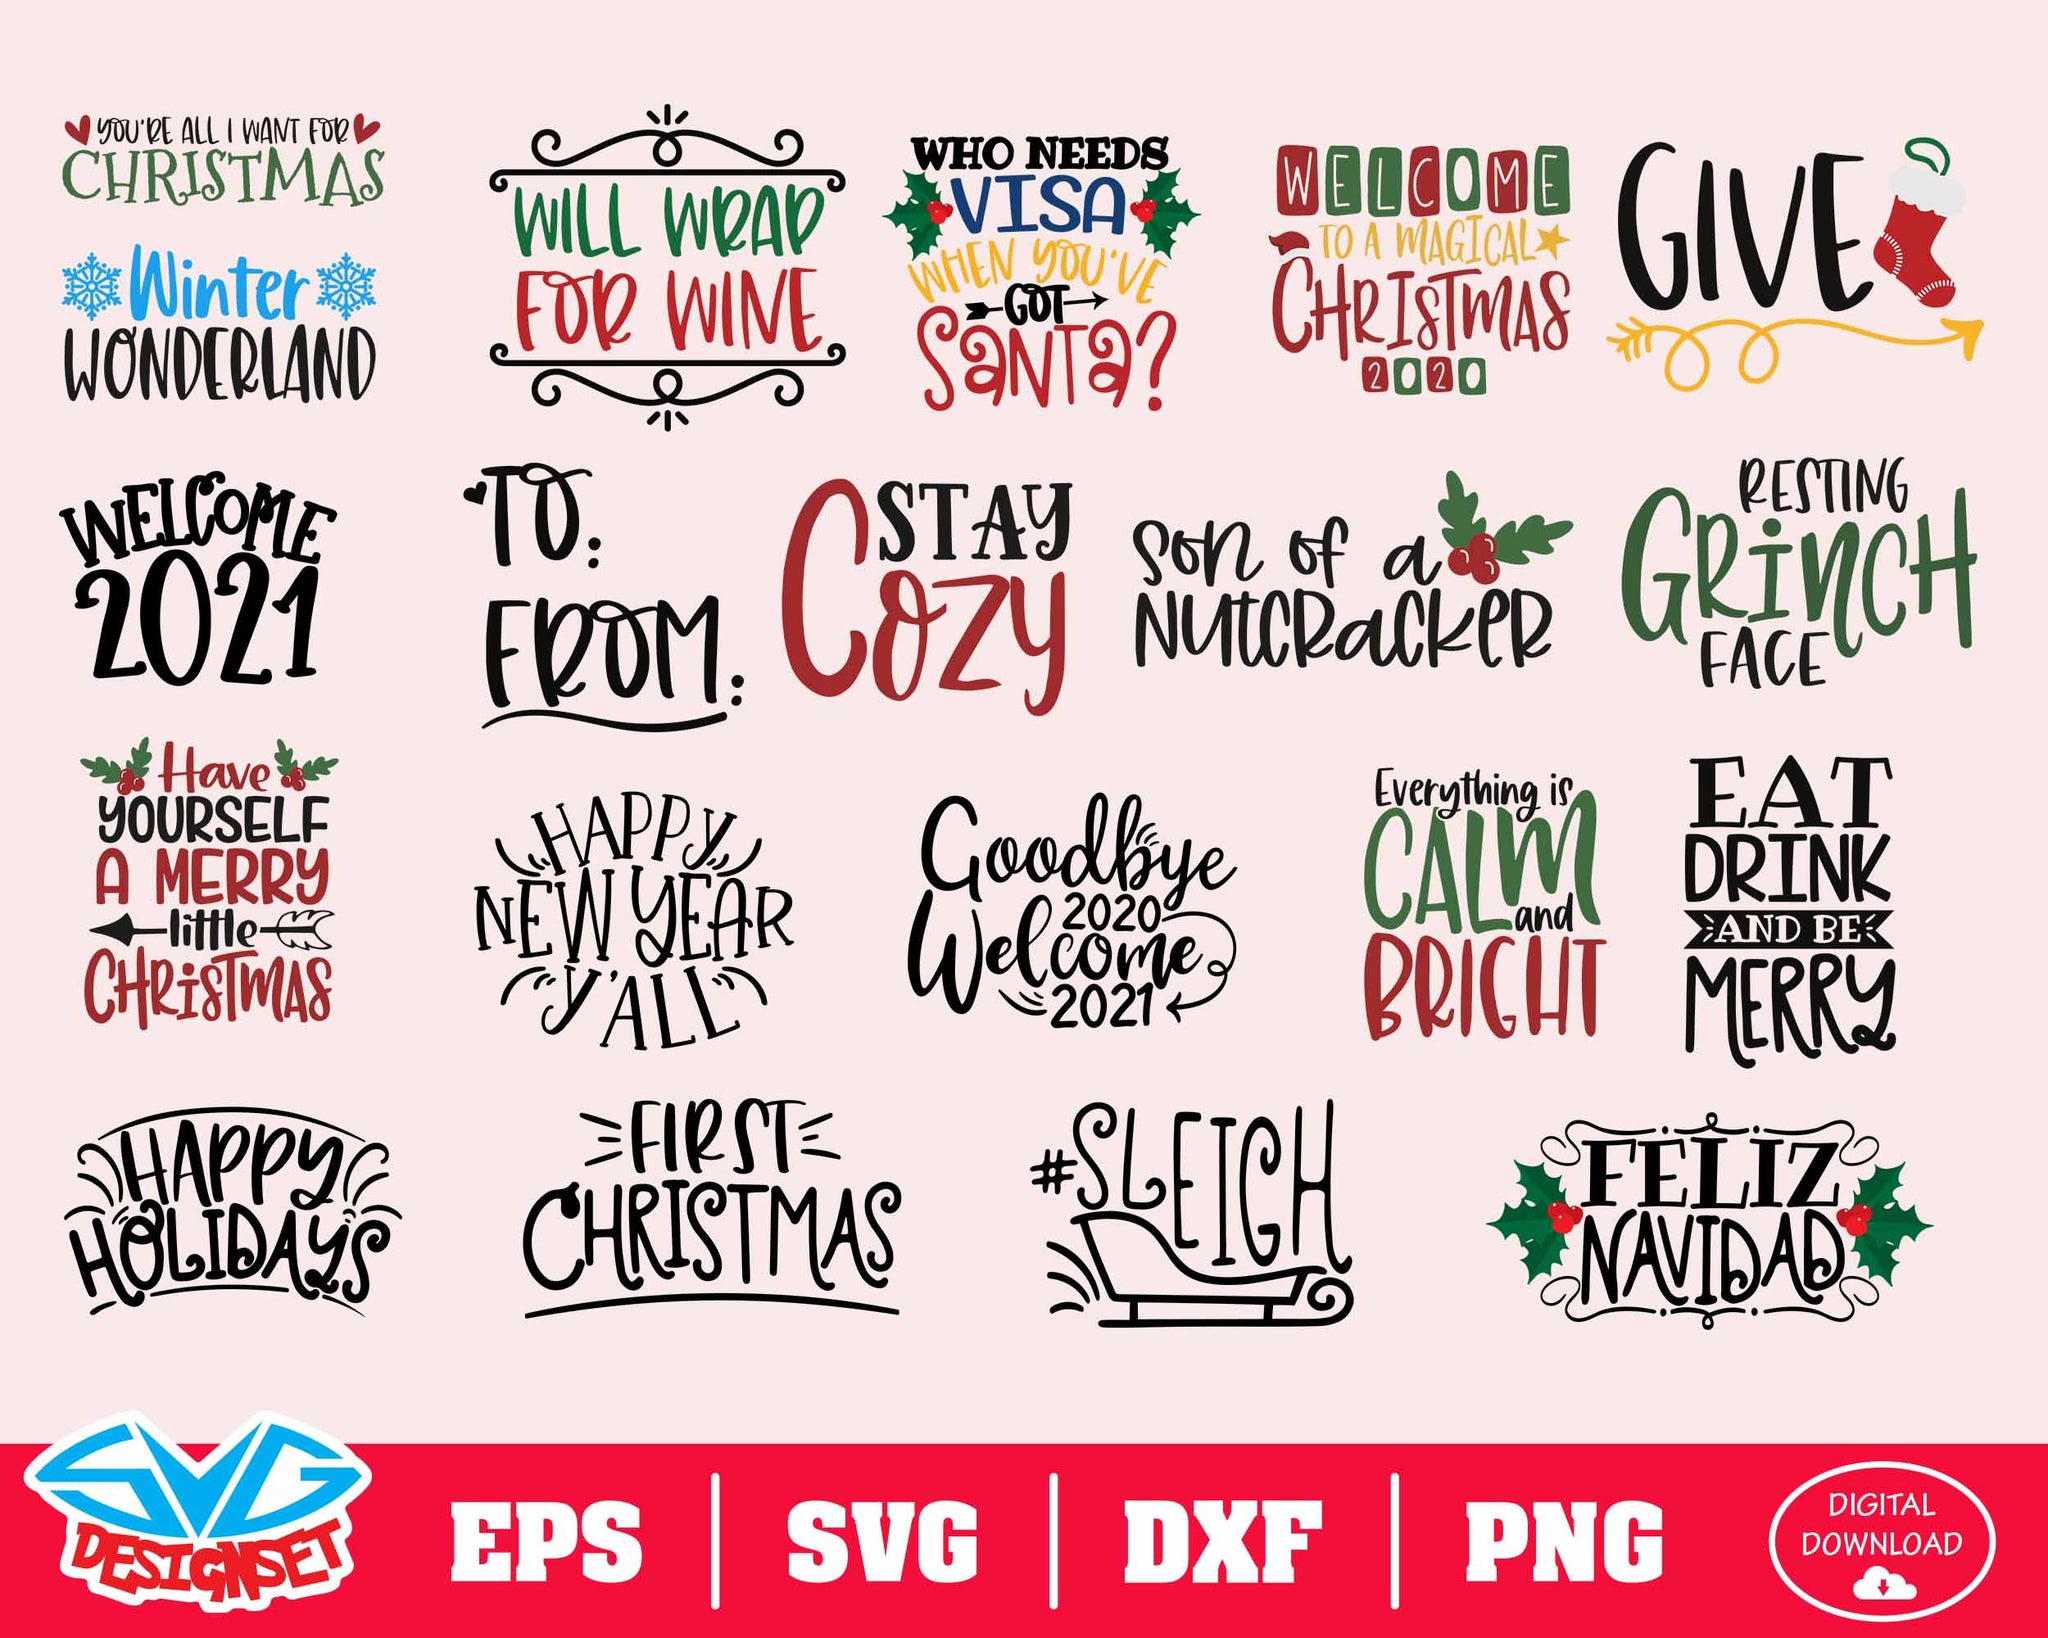 Christmas Bundle Svg, Dxf, Eps, Png, Clipart, Silhouette and Cutfiles #4 - SVGDesignSets